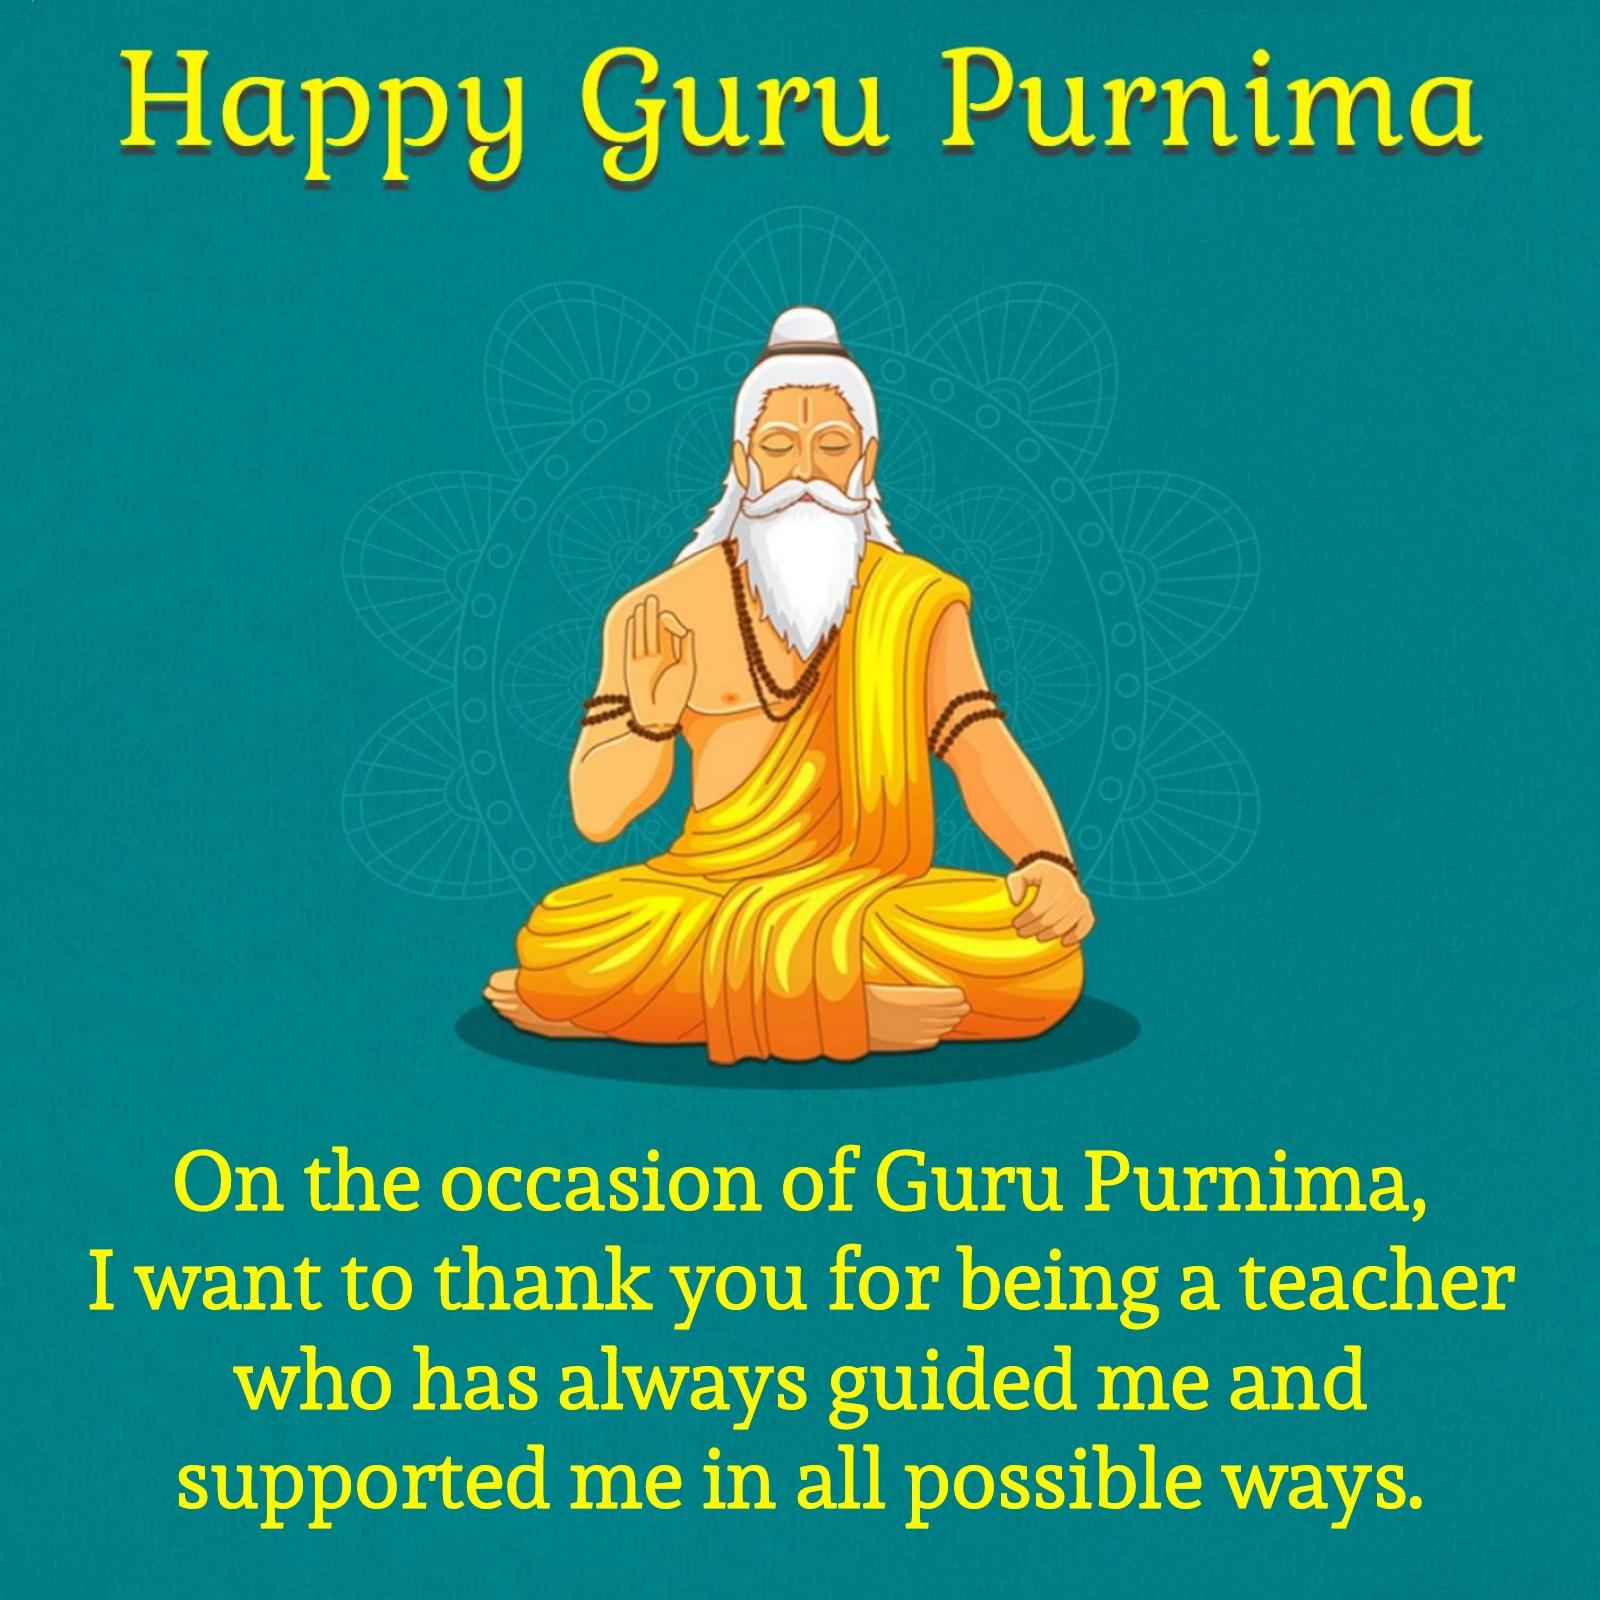 On the occasion of Guru Purnima I want to thank you for being a teacher